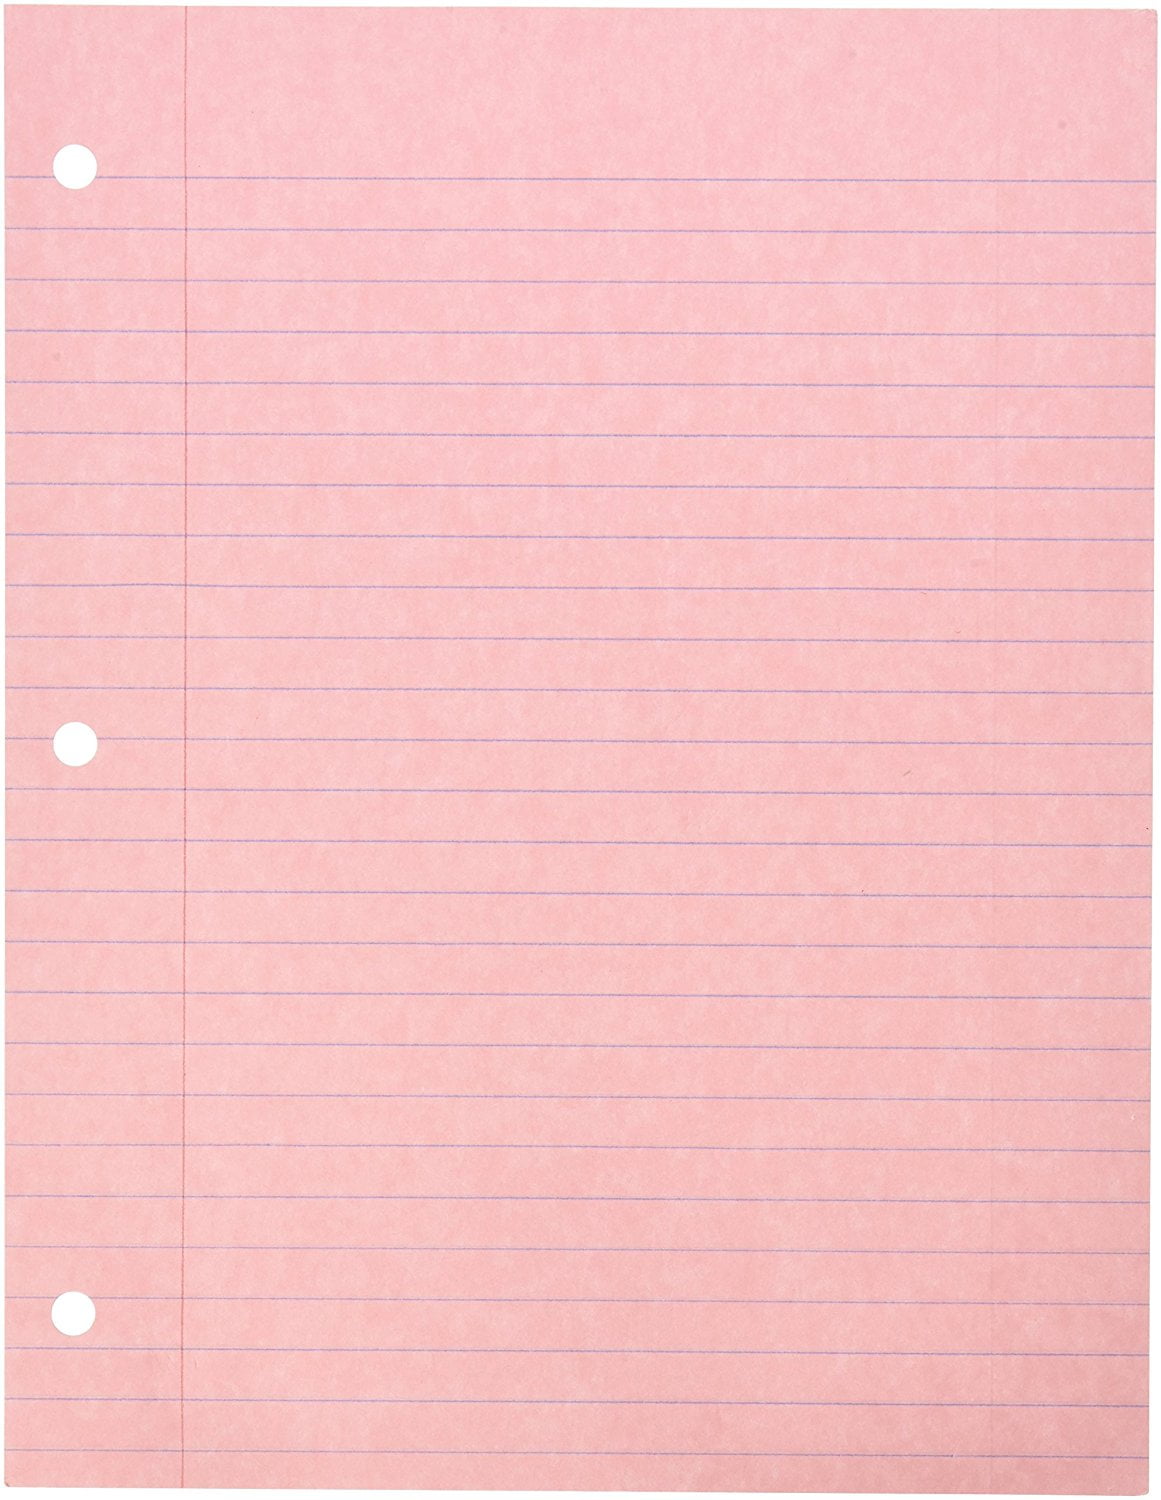 087155 3 hole punched notebook filler paper 8 1 2 x 11 pink pack of 100 sold as a pack of 100 sheets in pink only by school specialty walmart com